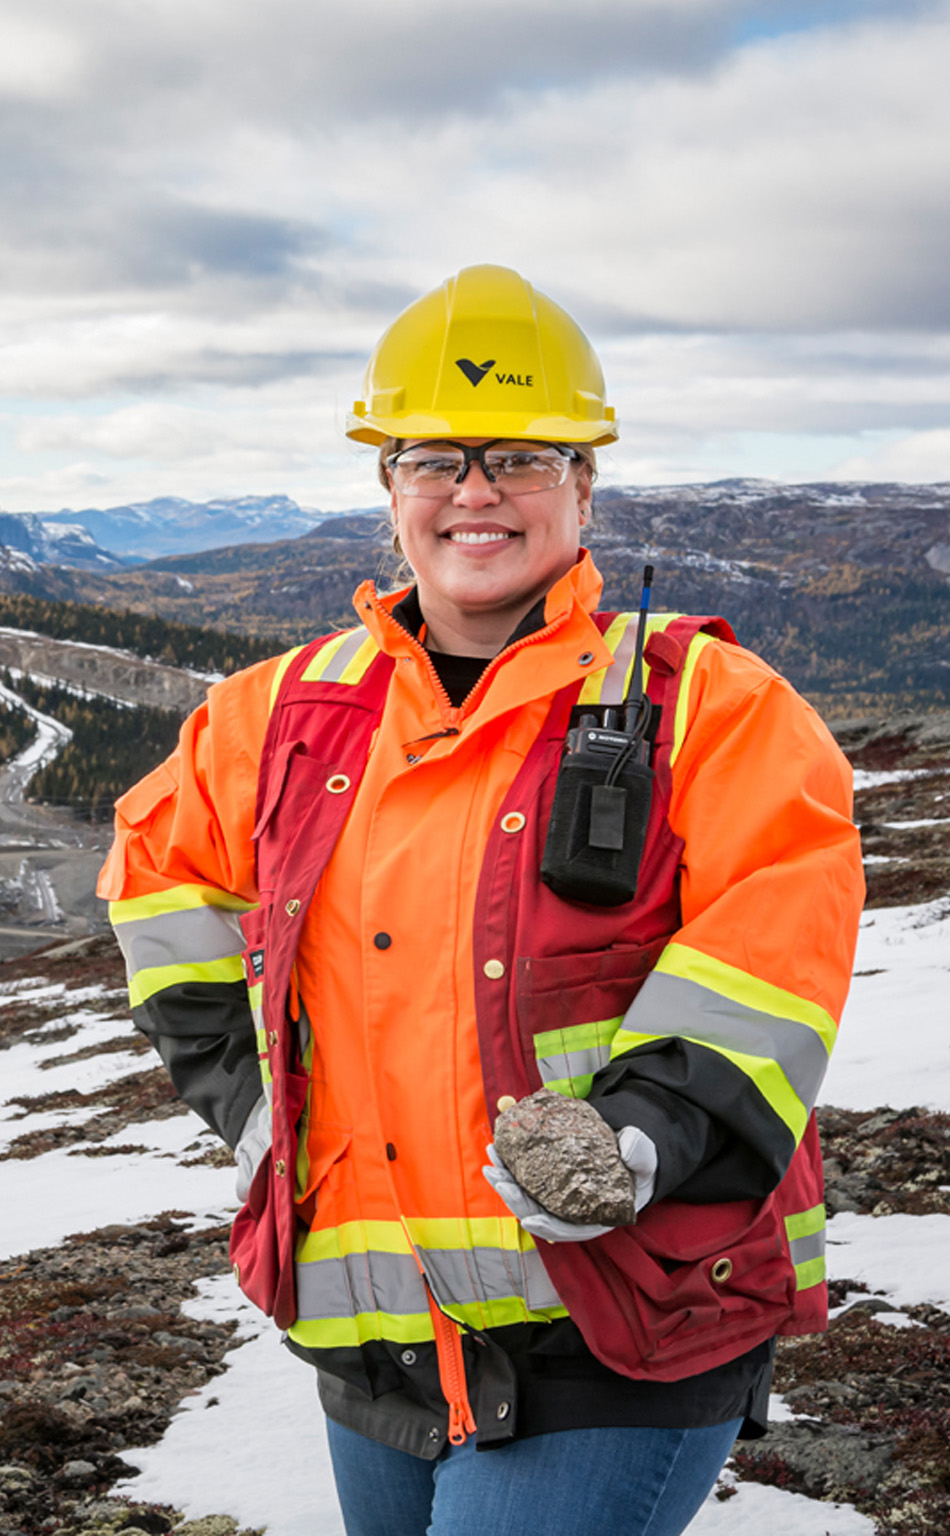 Vale employee smiling in green landscape. She is wearing a green Vale
uniform, goggles, helmet and ear plugs.